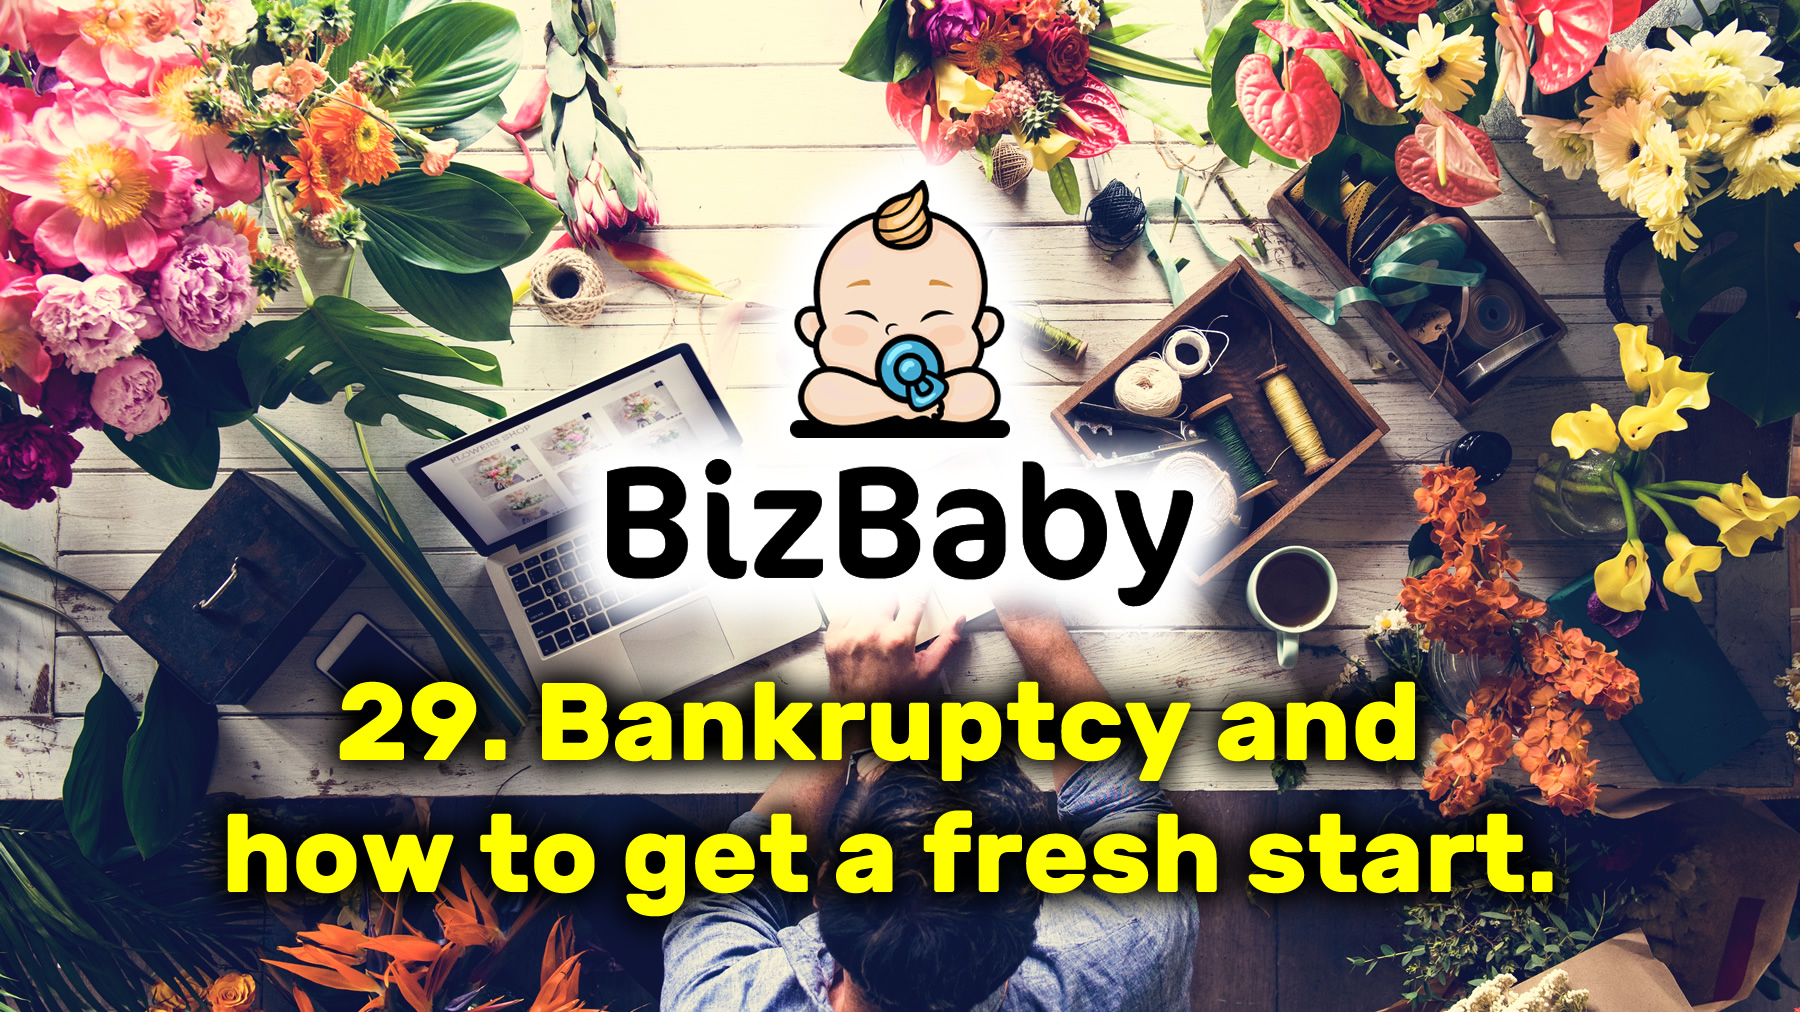 Bankruptcy and how to get a fresh start